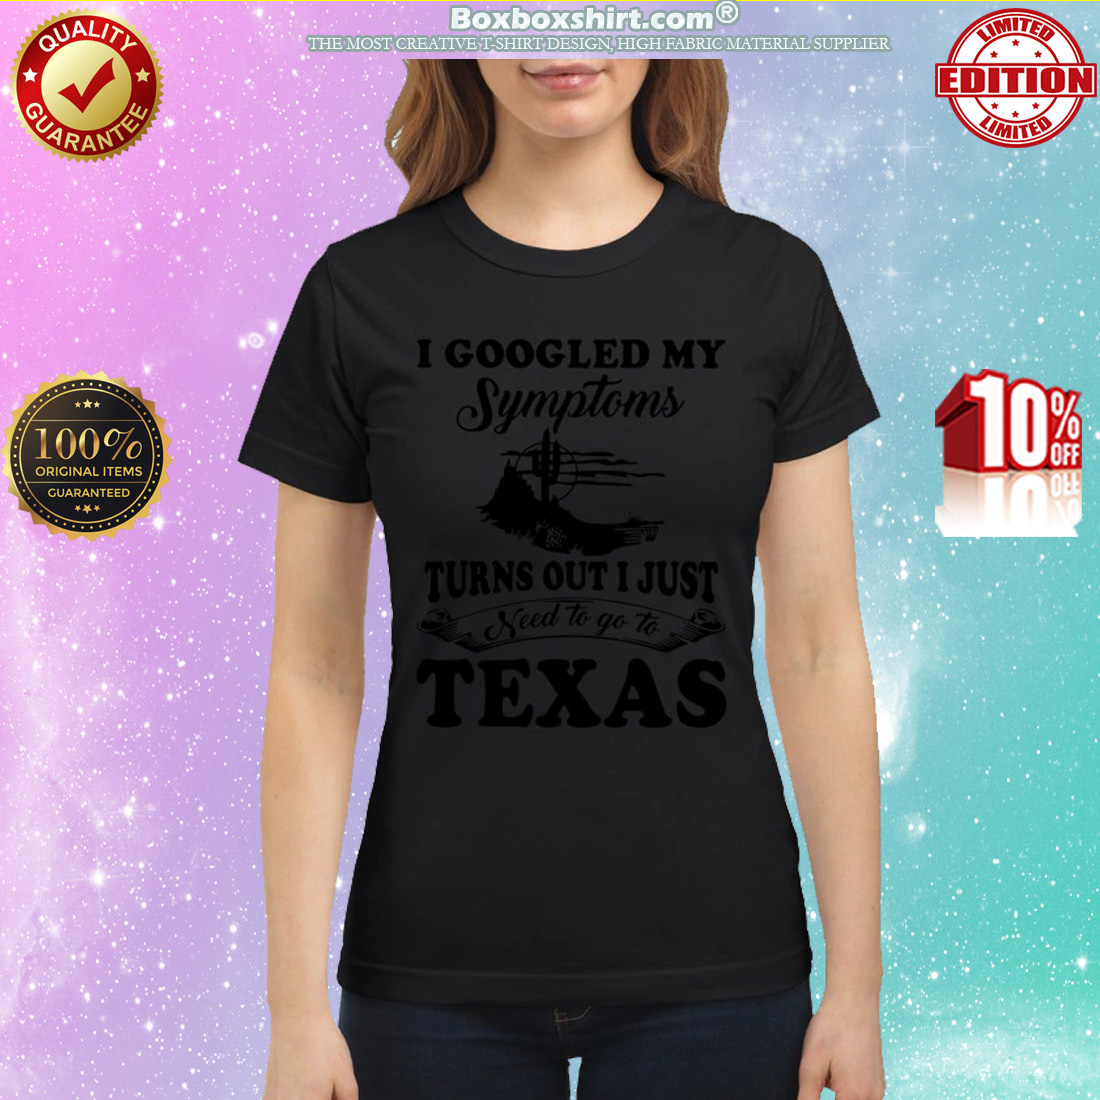 I googled my symptoms turns out i just need to Texas classic shirt